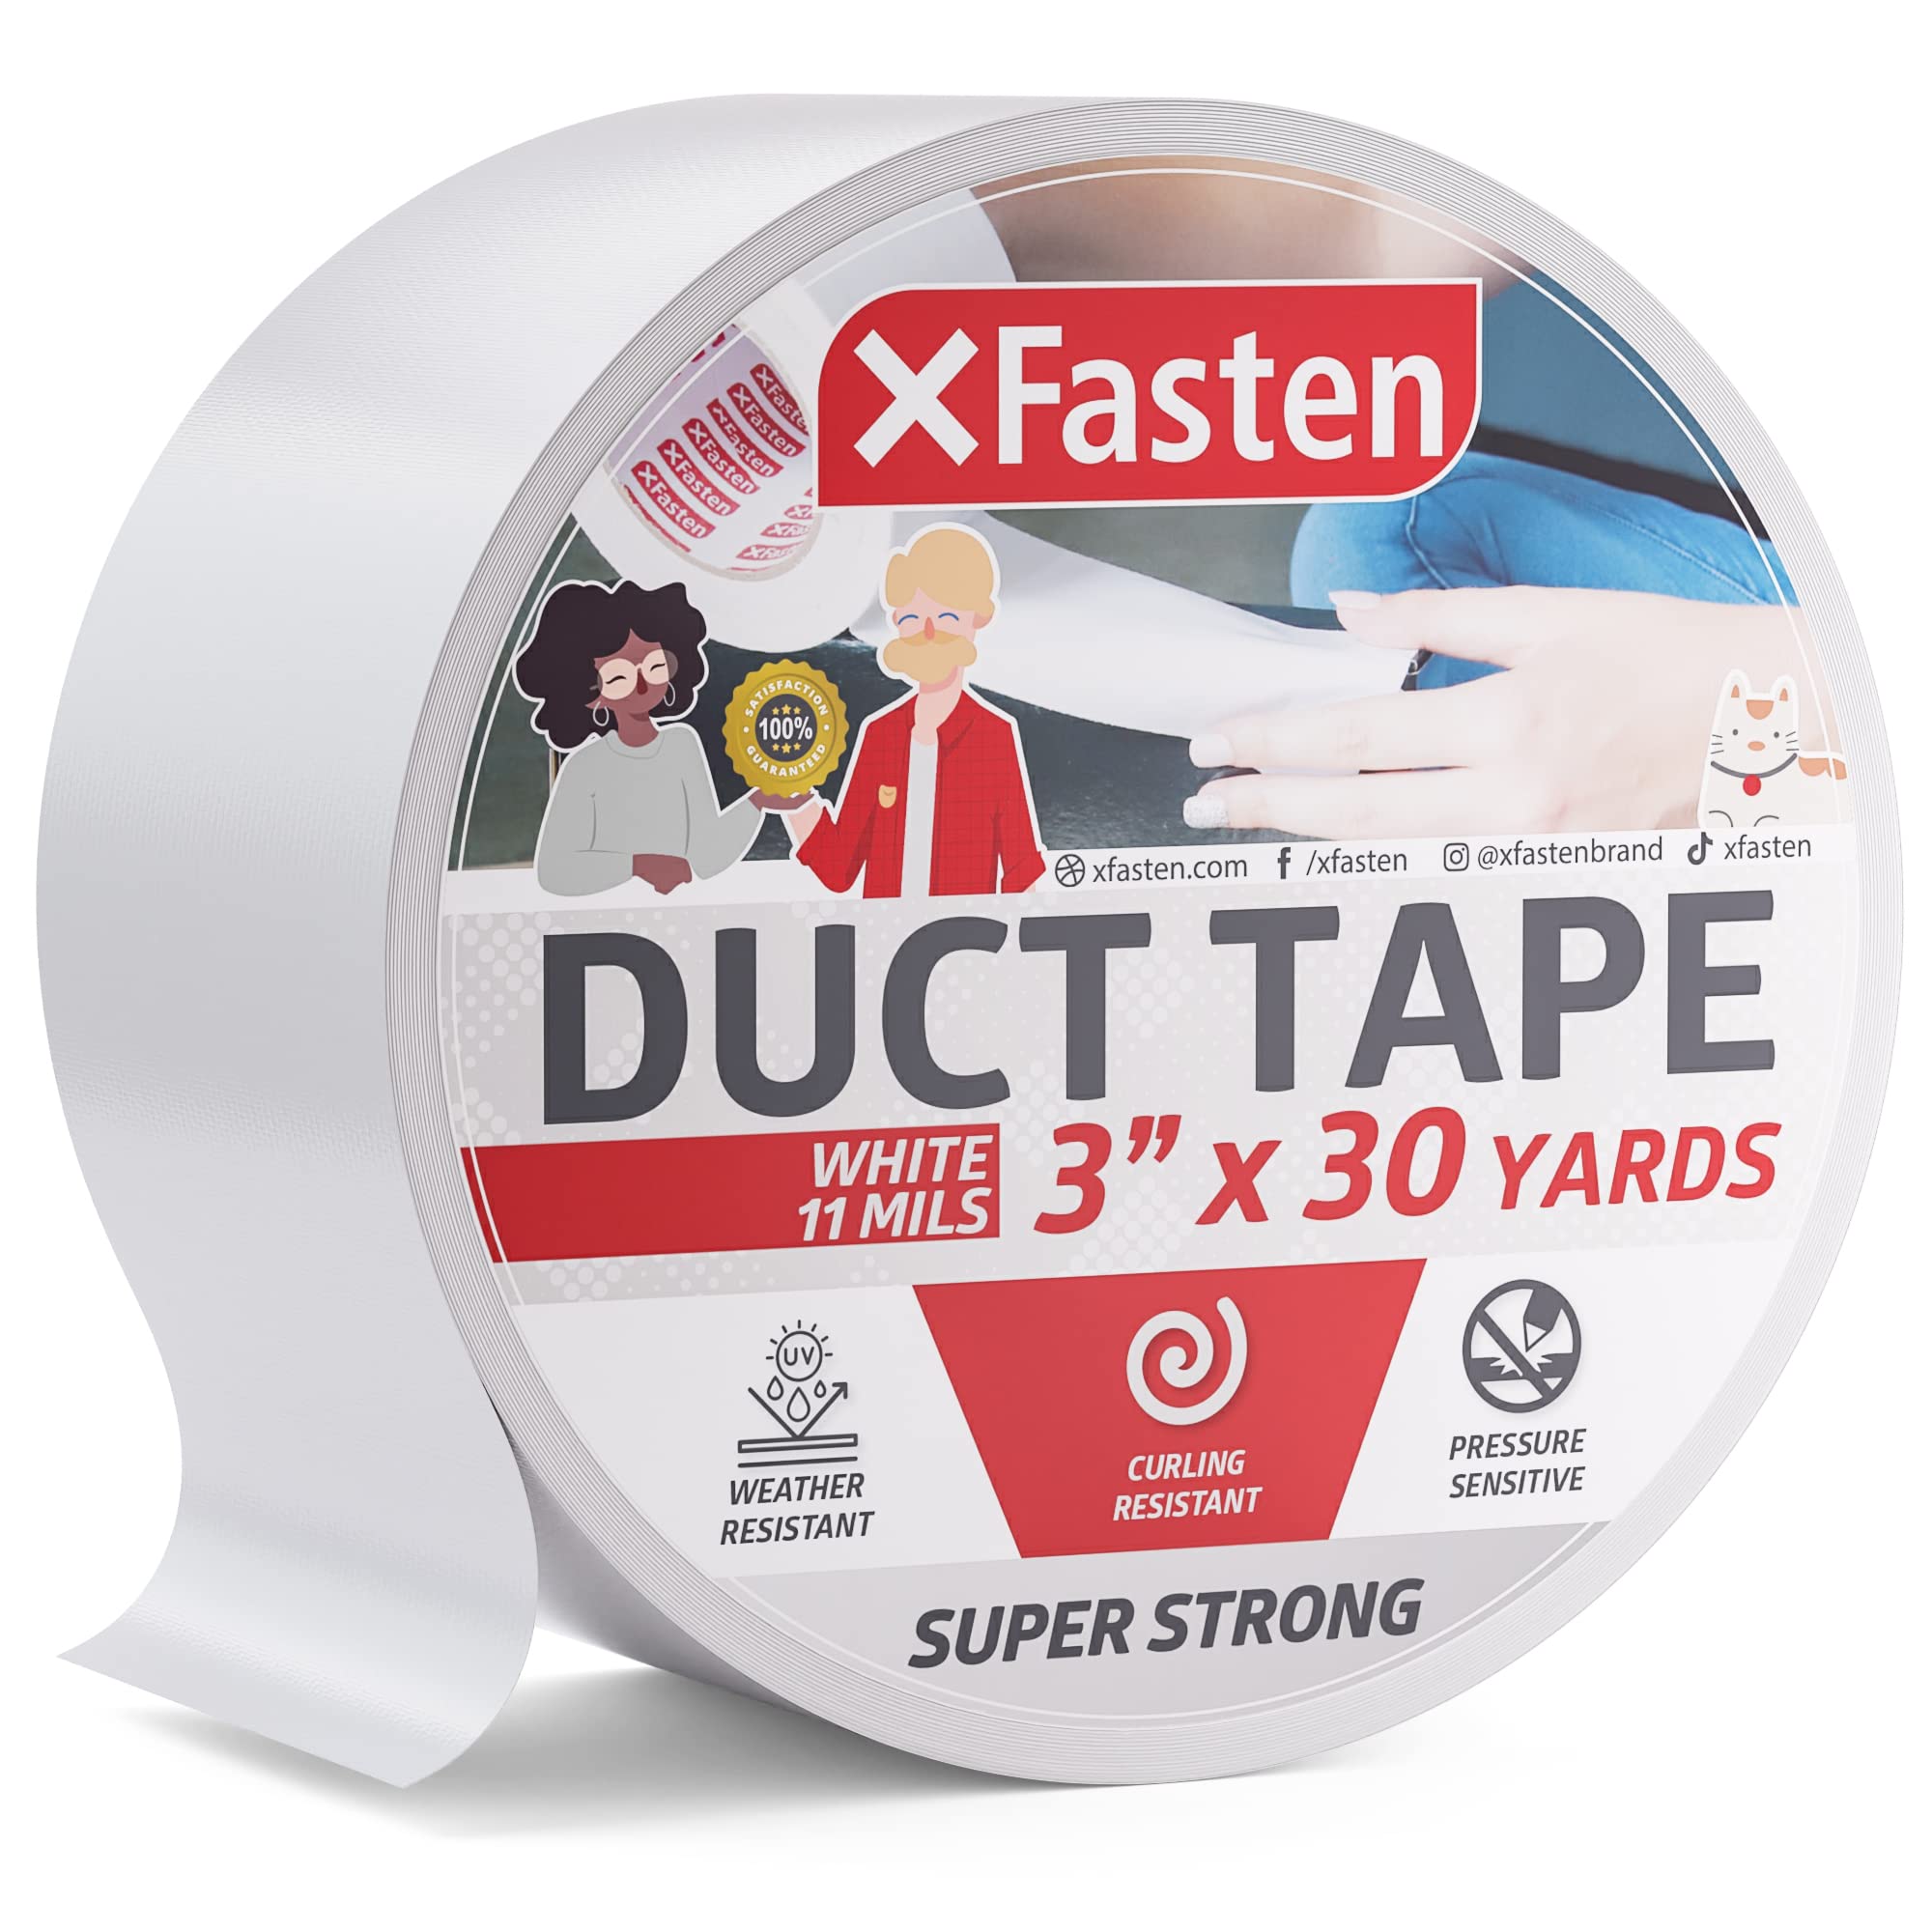 XFasten Super Strong Duct Tape, White, 3 x 30 Yards, Waterproof Duct Tape  for Outdoor, Indoor, School and Industrial Use 3-Inch by 30 Yards White